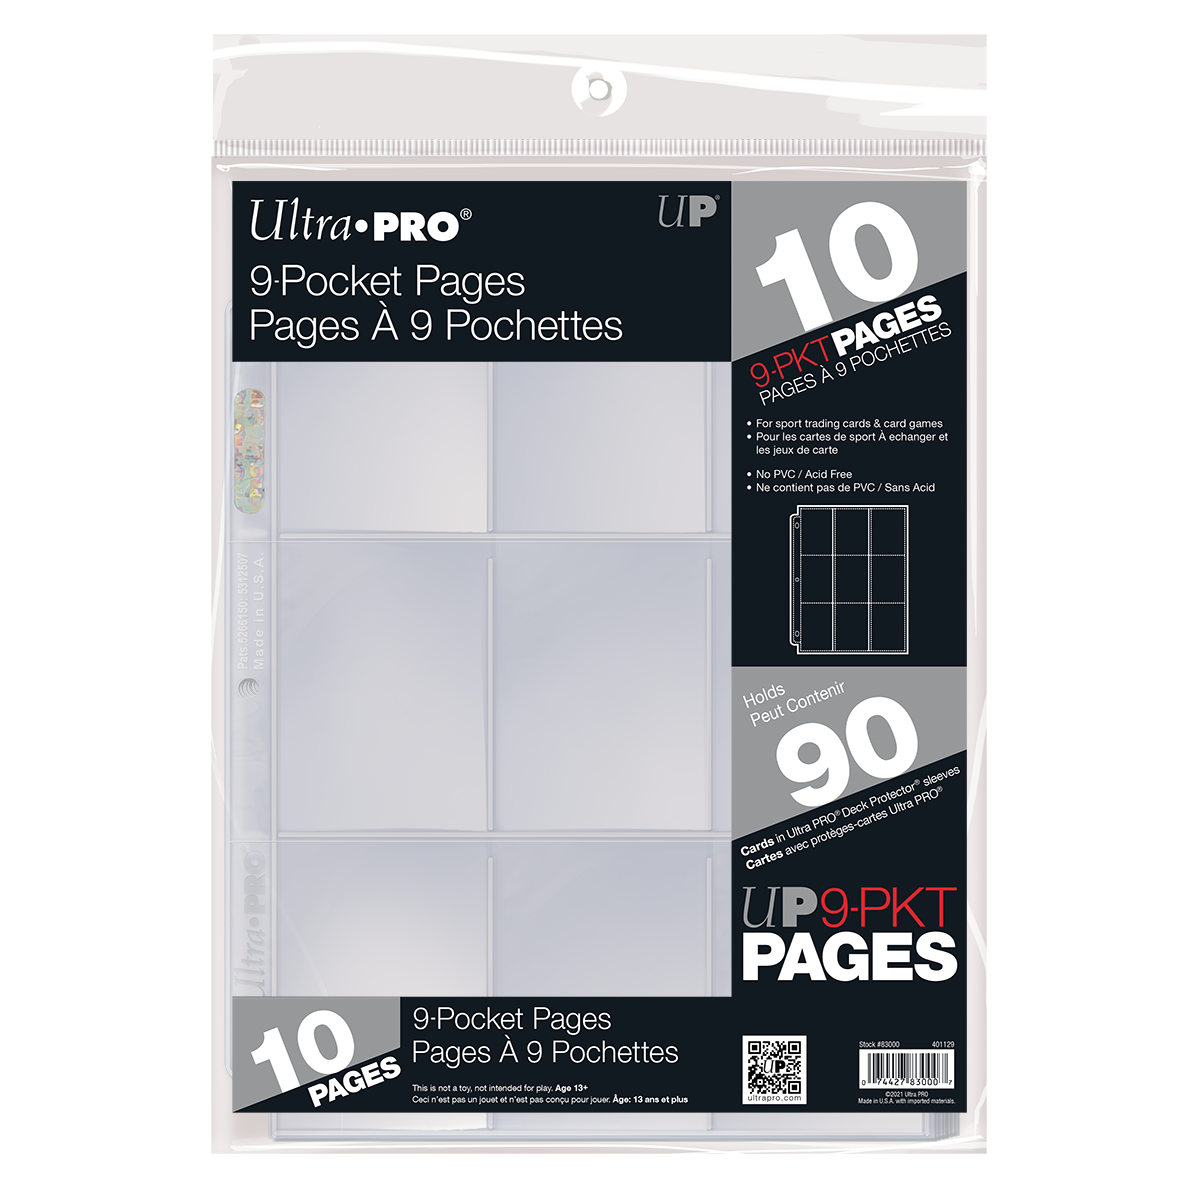 100 x ULTRA PRO SILVER SERIES 9 POCKET CARD SLEEVES SEALED BOX PAGES AFL  POKEMON